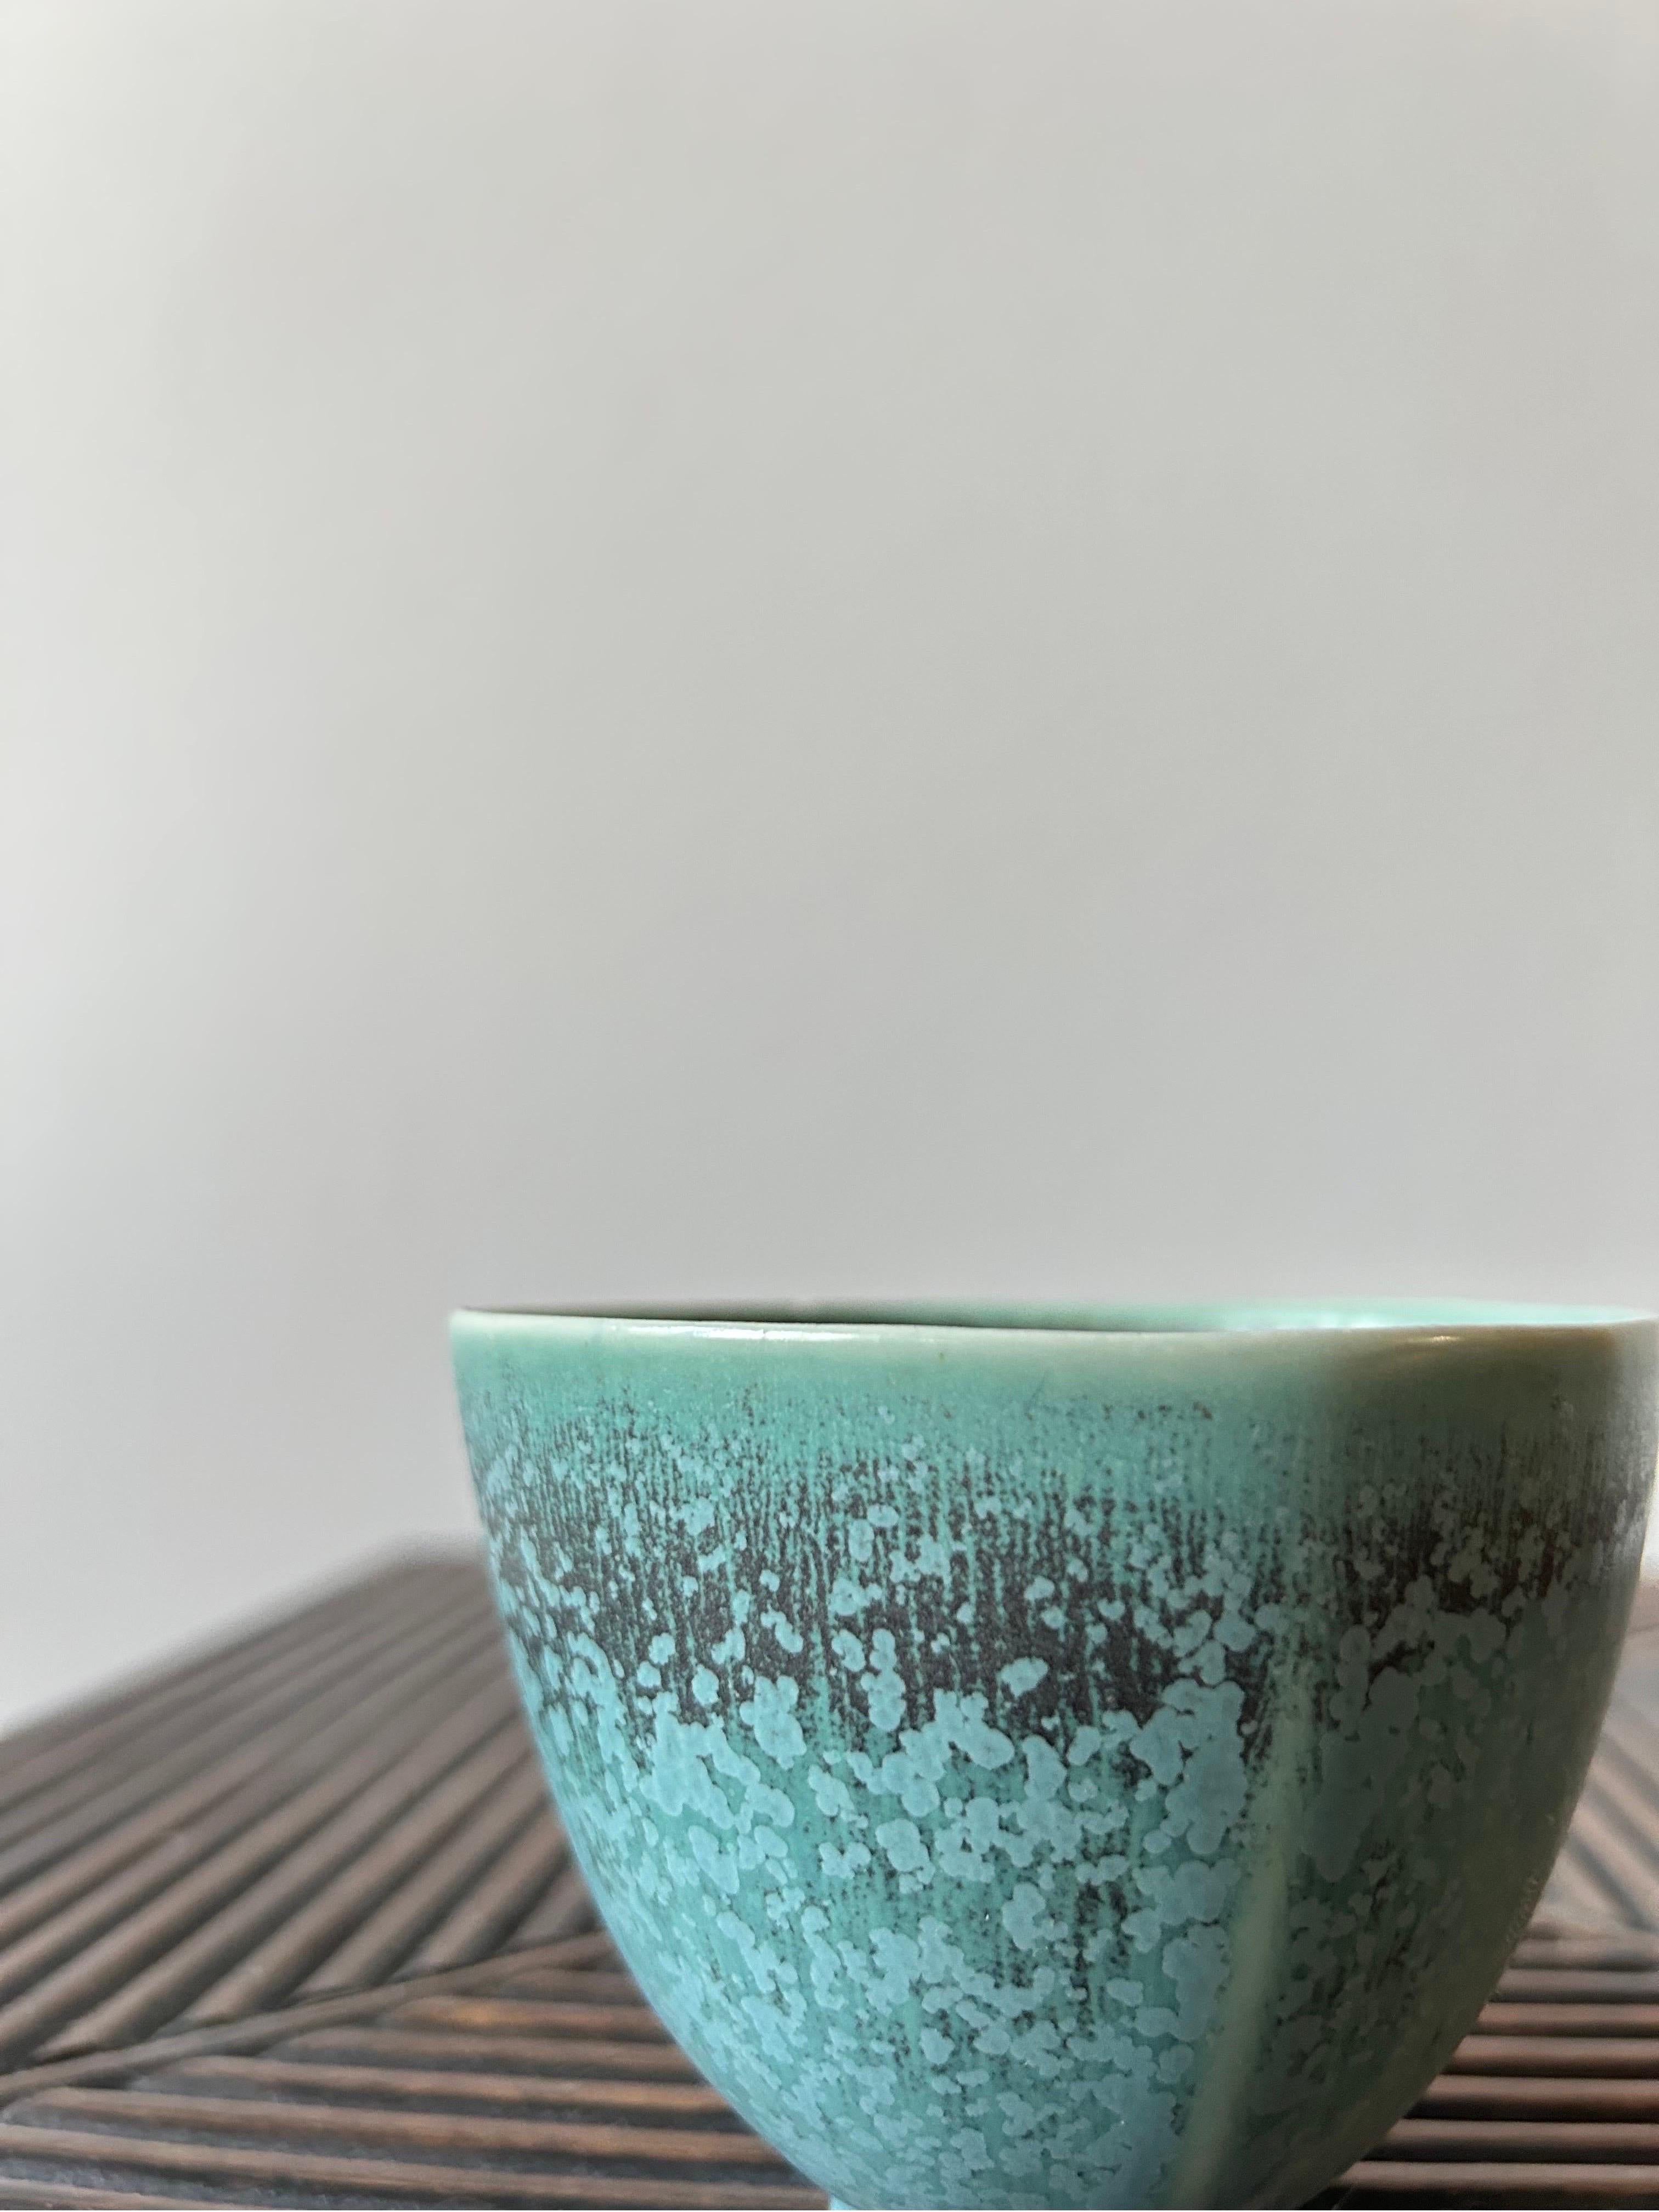 Berndt Friberg ceramic bowl in a beautiful blue glaze, the bowl is designed by Berndt Friberg and made at Gustavsberg in the 1950s.

Berndt Friberg designed the Selecta series in the 1960s for Gustavsberg Porcelain Factory. The series consists of